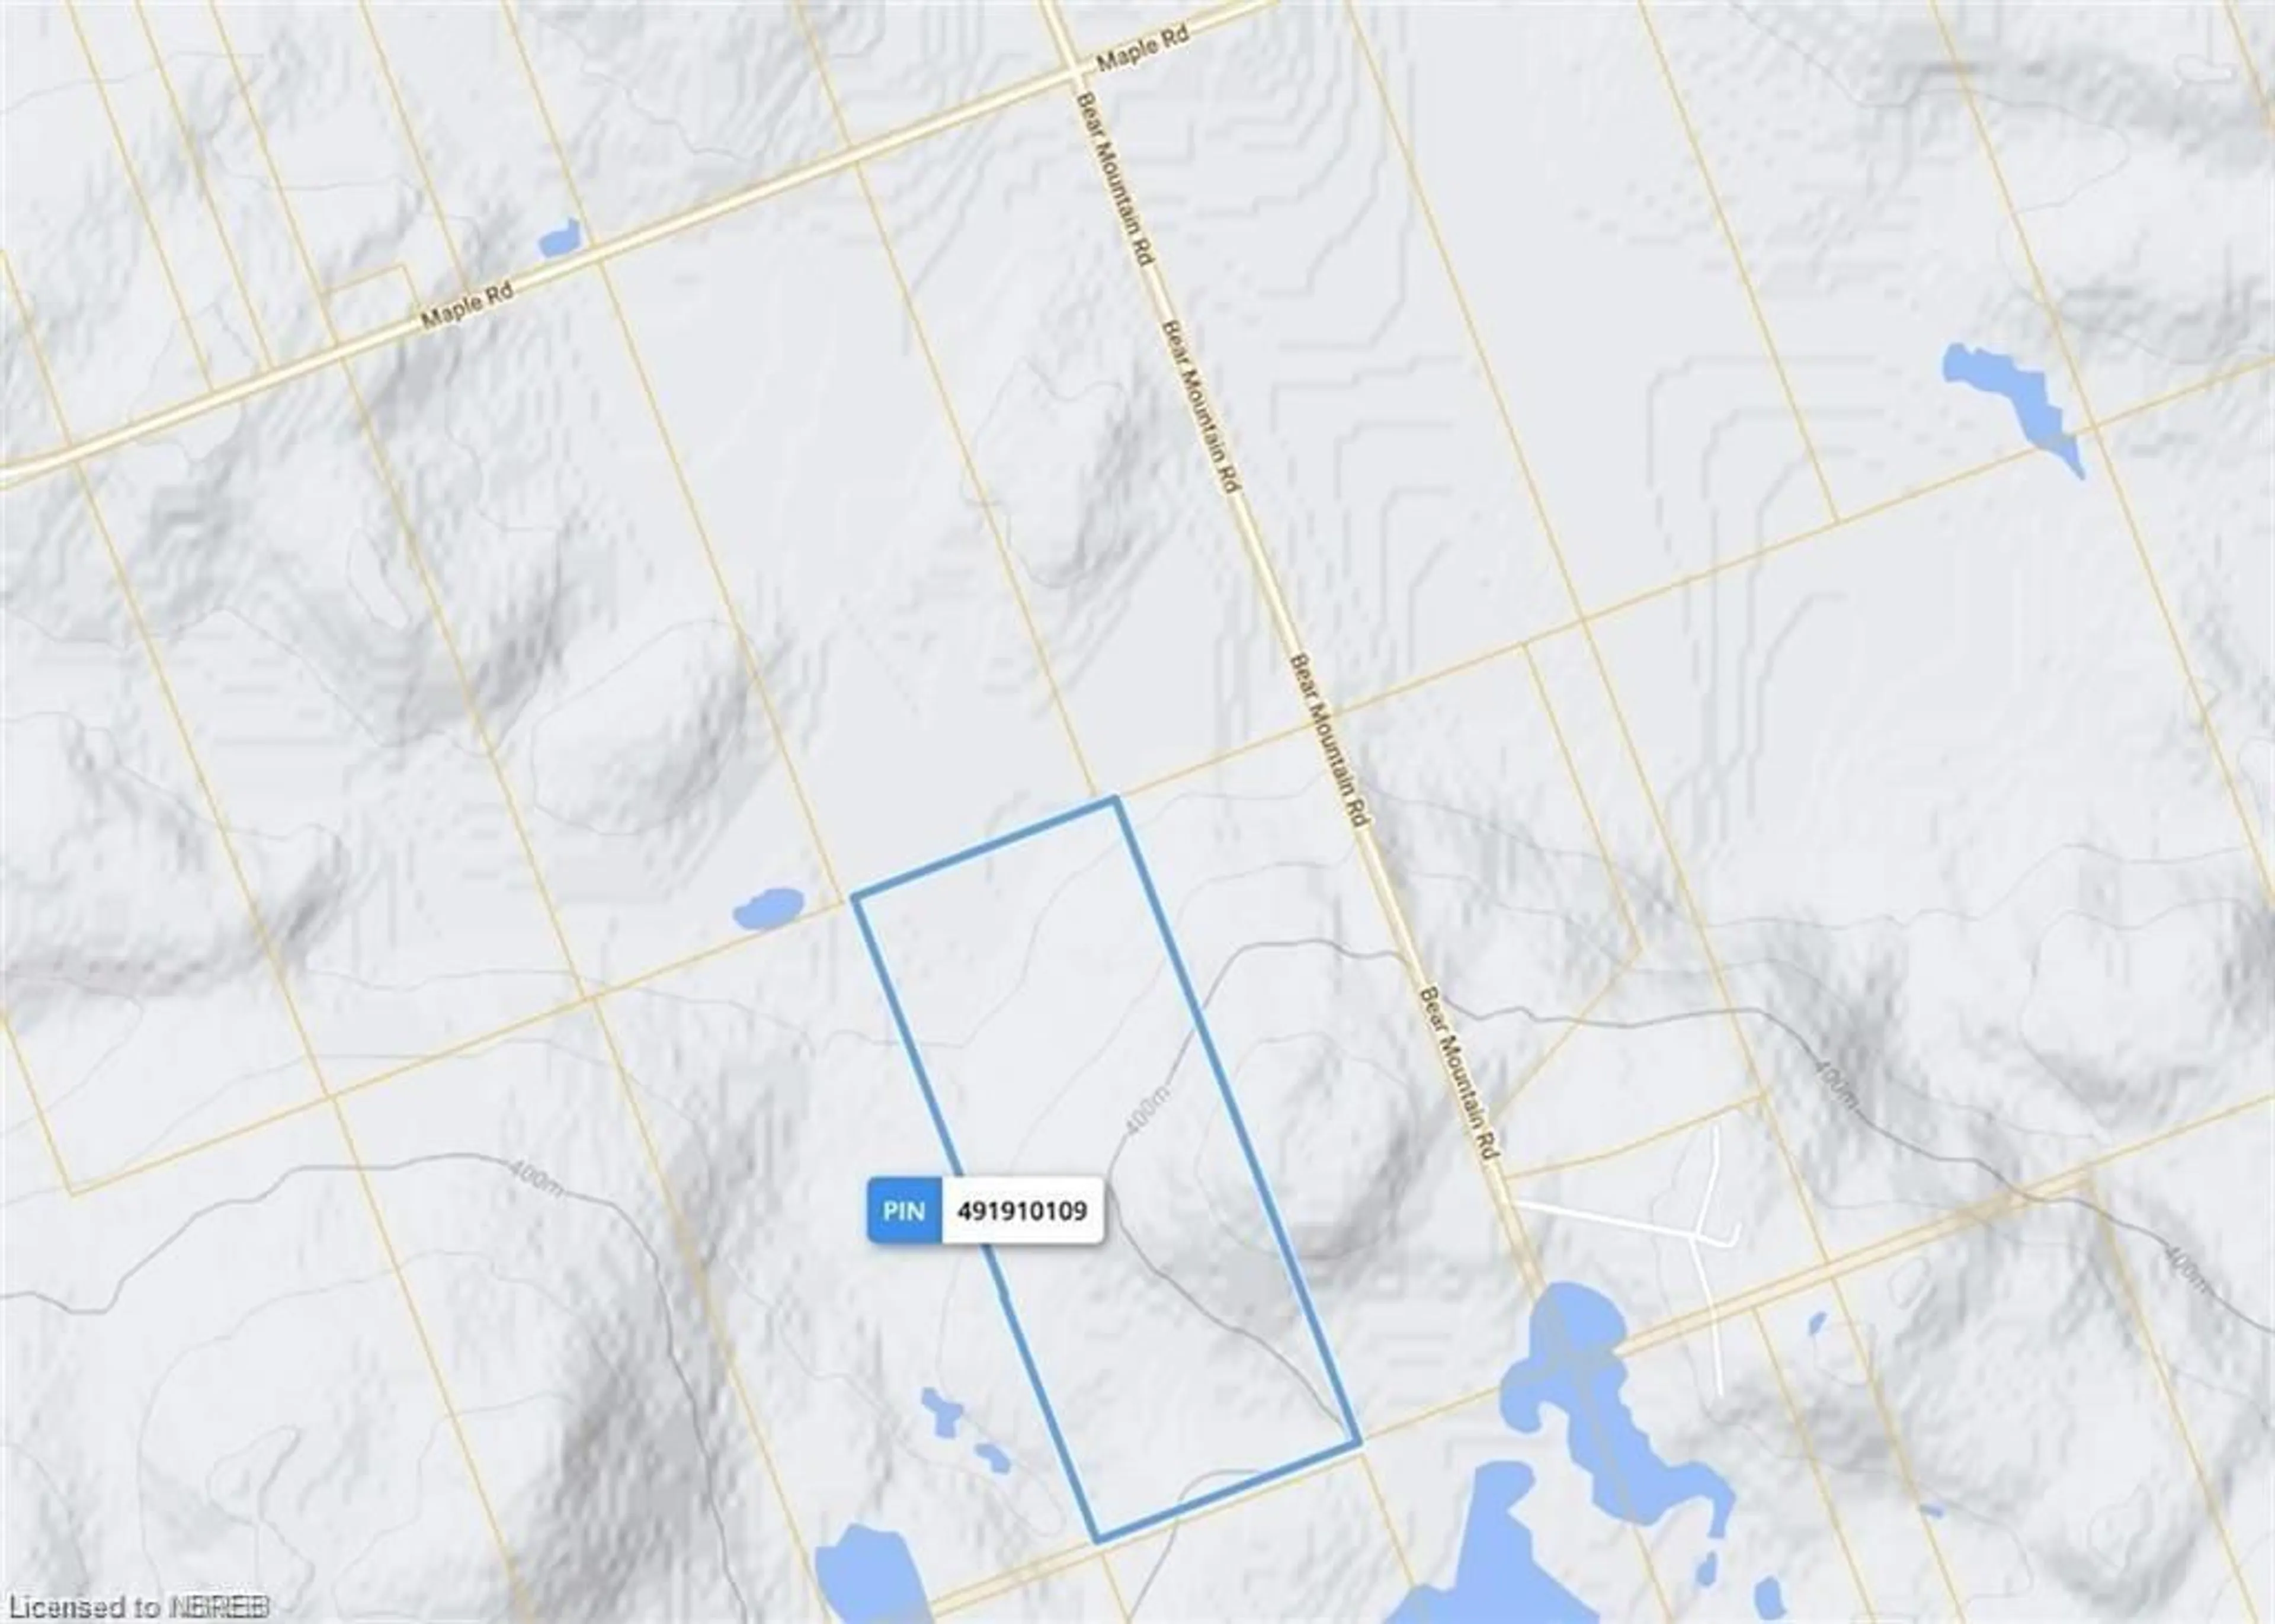 Picture of a map for LT 4, CON 3 Bear Mountain, Chisholm Ontario P0H 1Z0